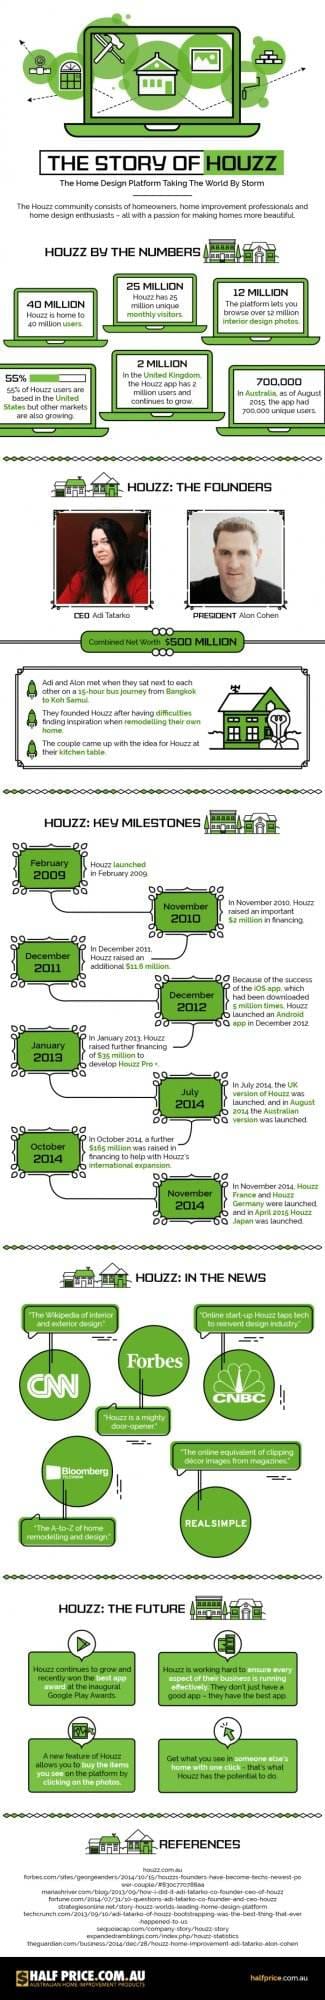 The Story of Houzz - The Home Design Platform - Infographic declutter your home